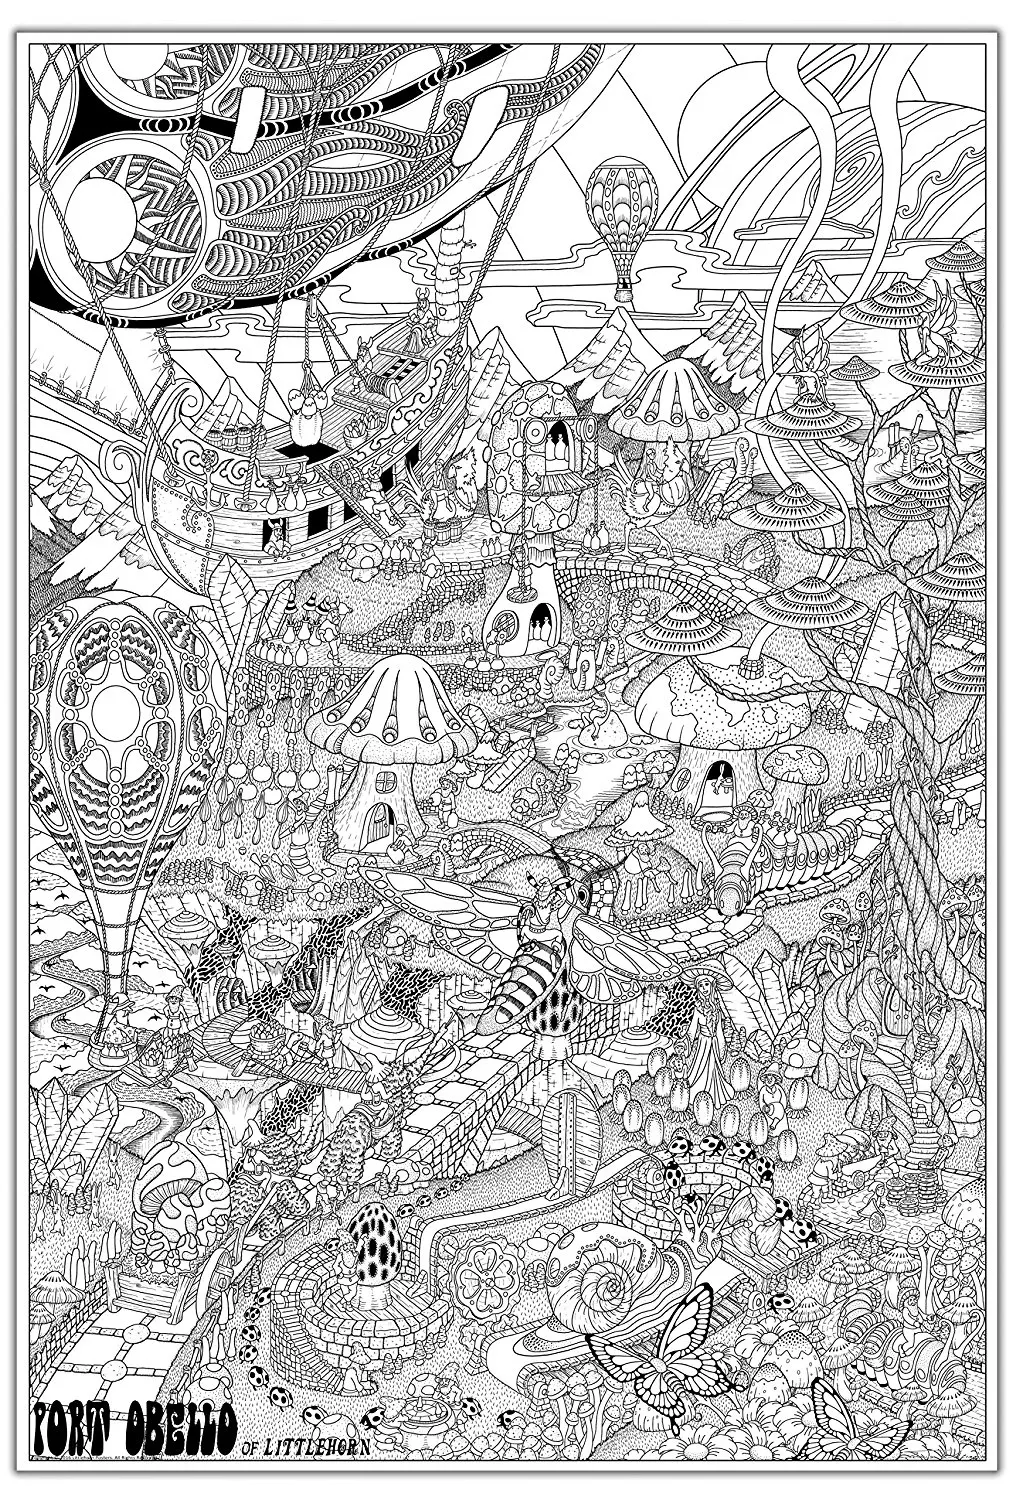 Cheap Giant Coloring Poster Find Giant Coloring Poster Deals On